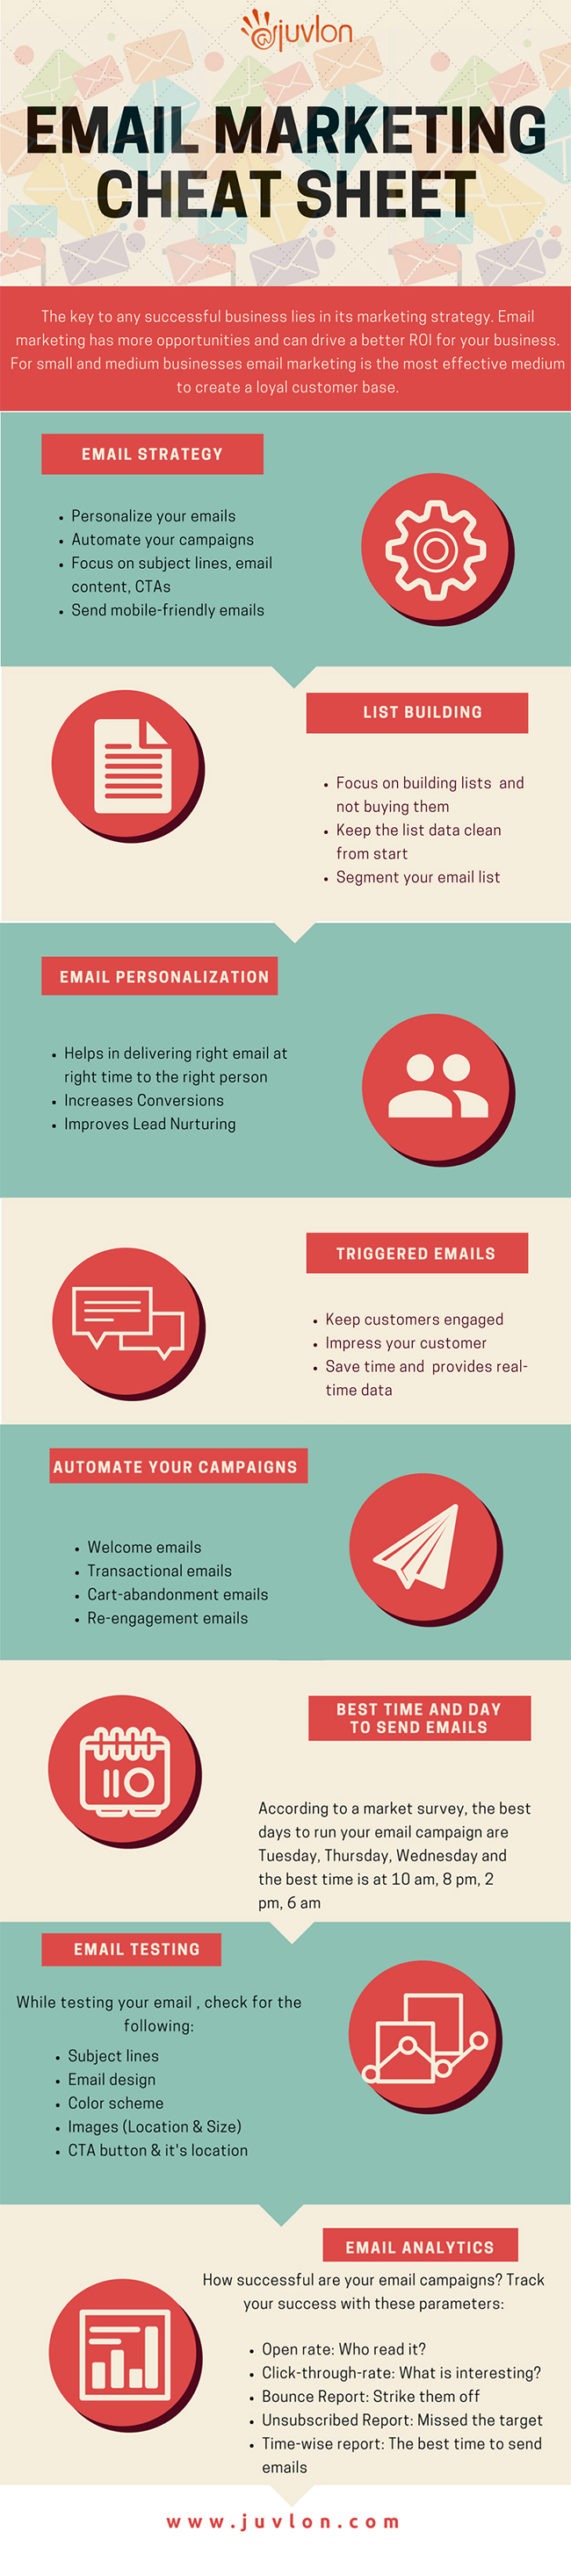 InfoG: The Future Of Email Marketing Automation
